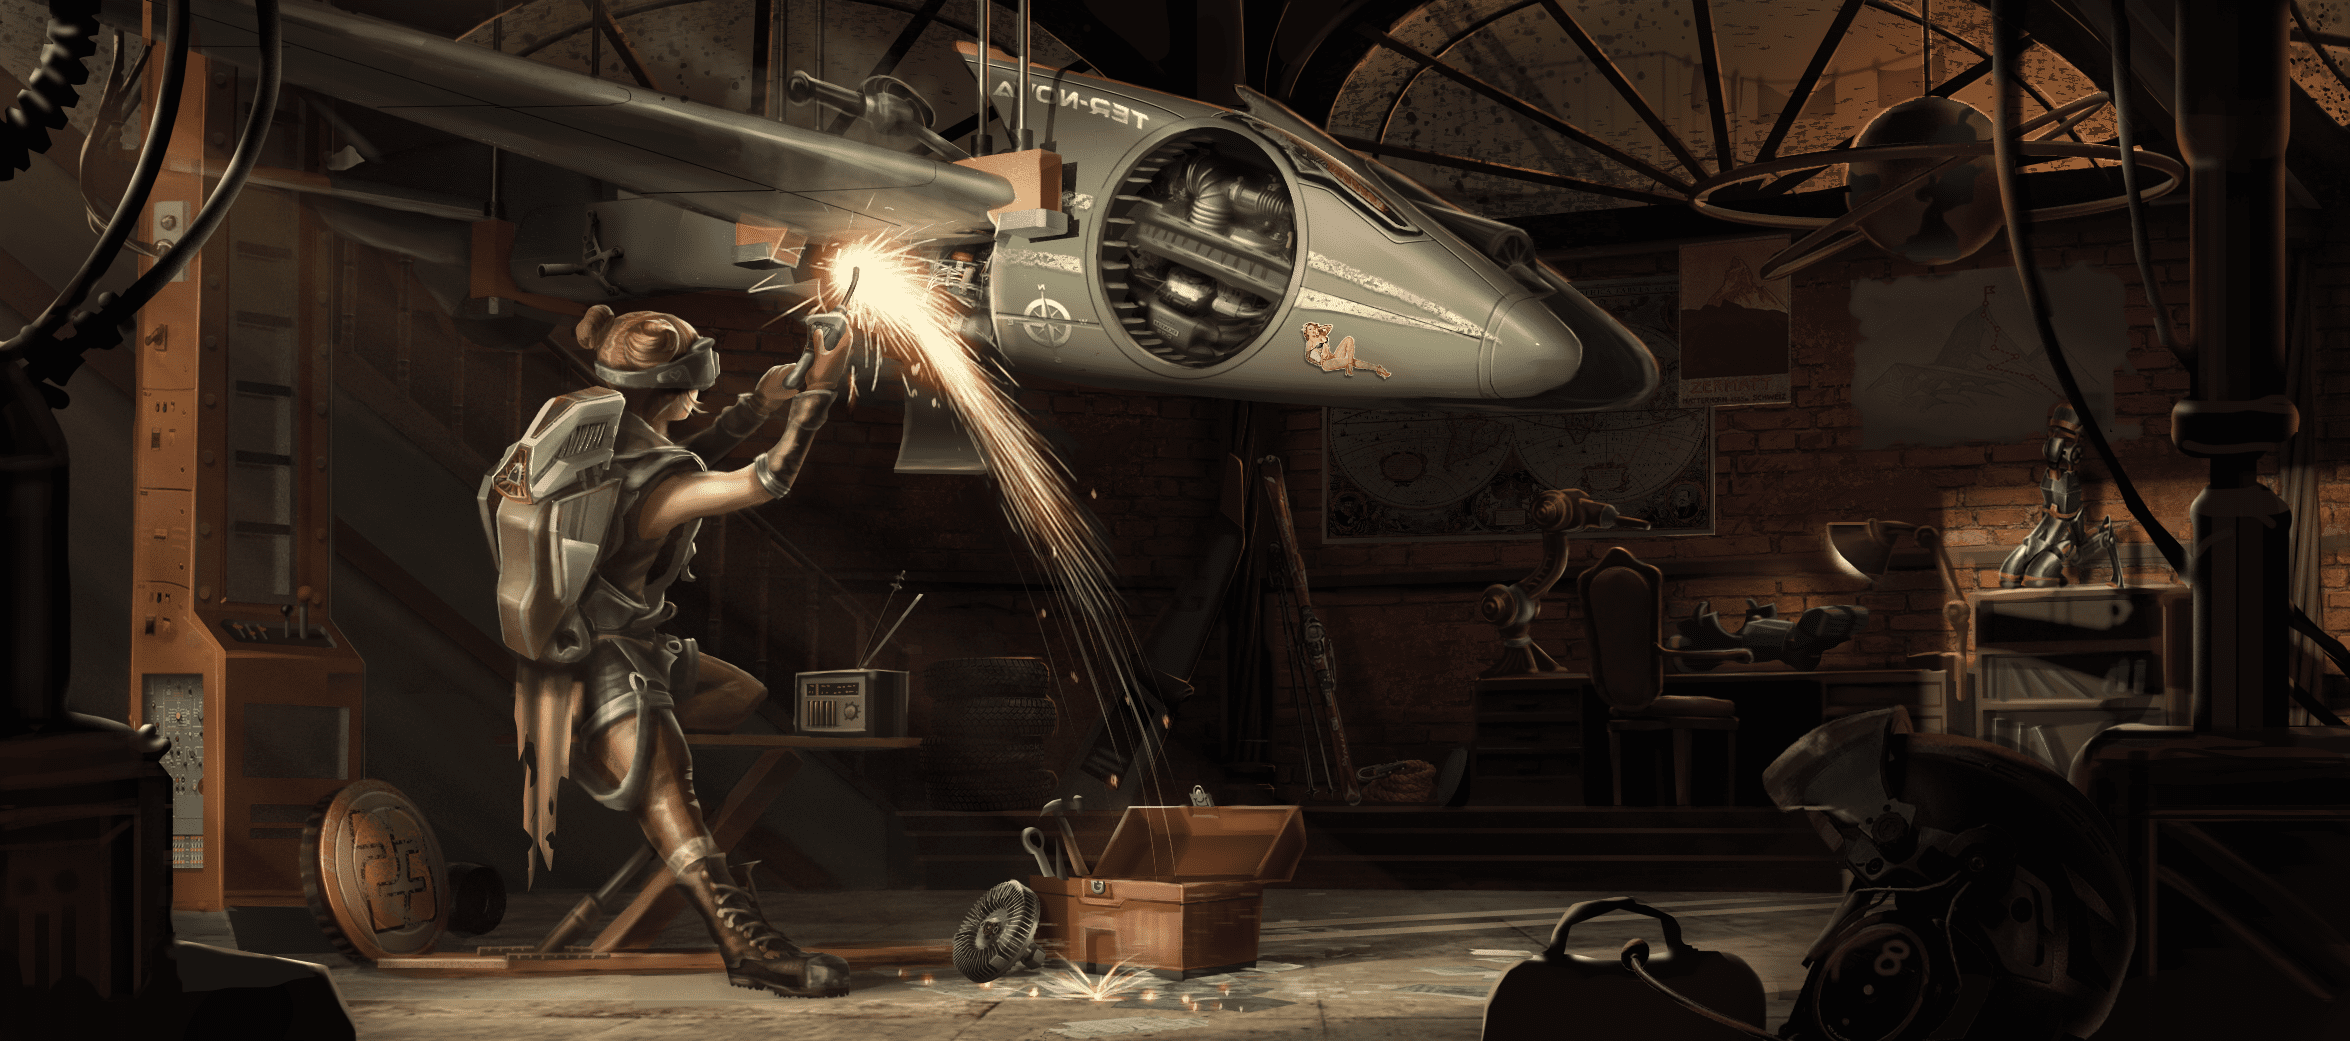 Concept art of a futuristic mechanic working on a war aircraft in a mechanic garage with sparks flying.